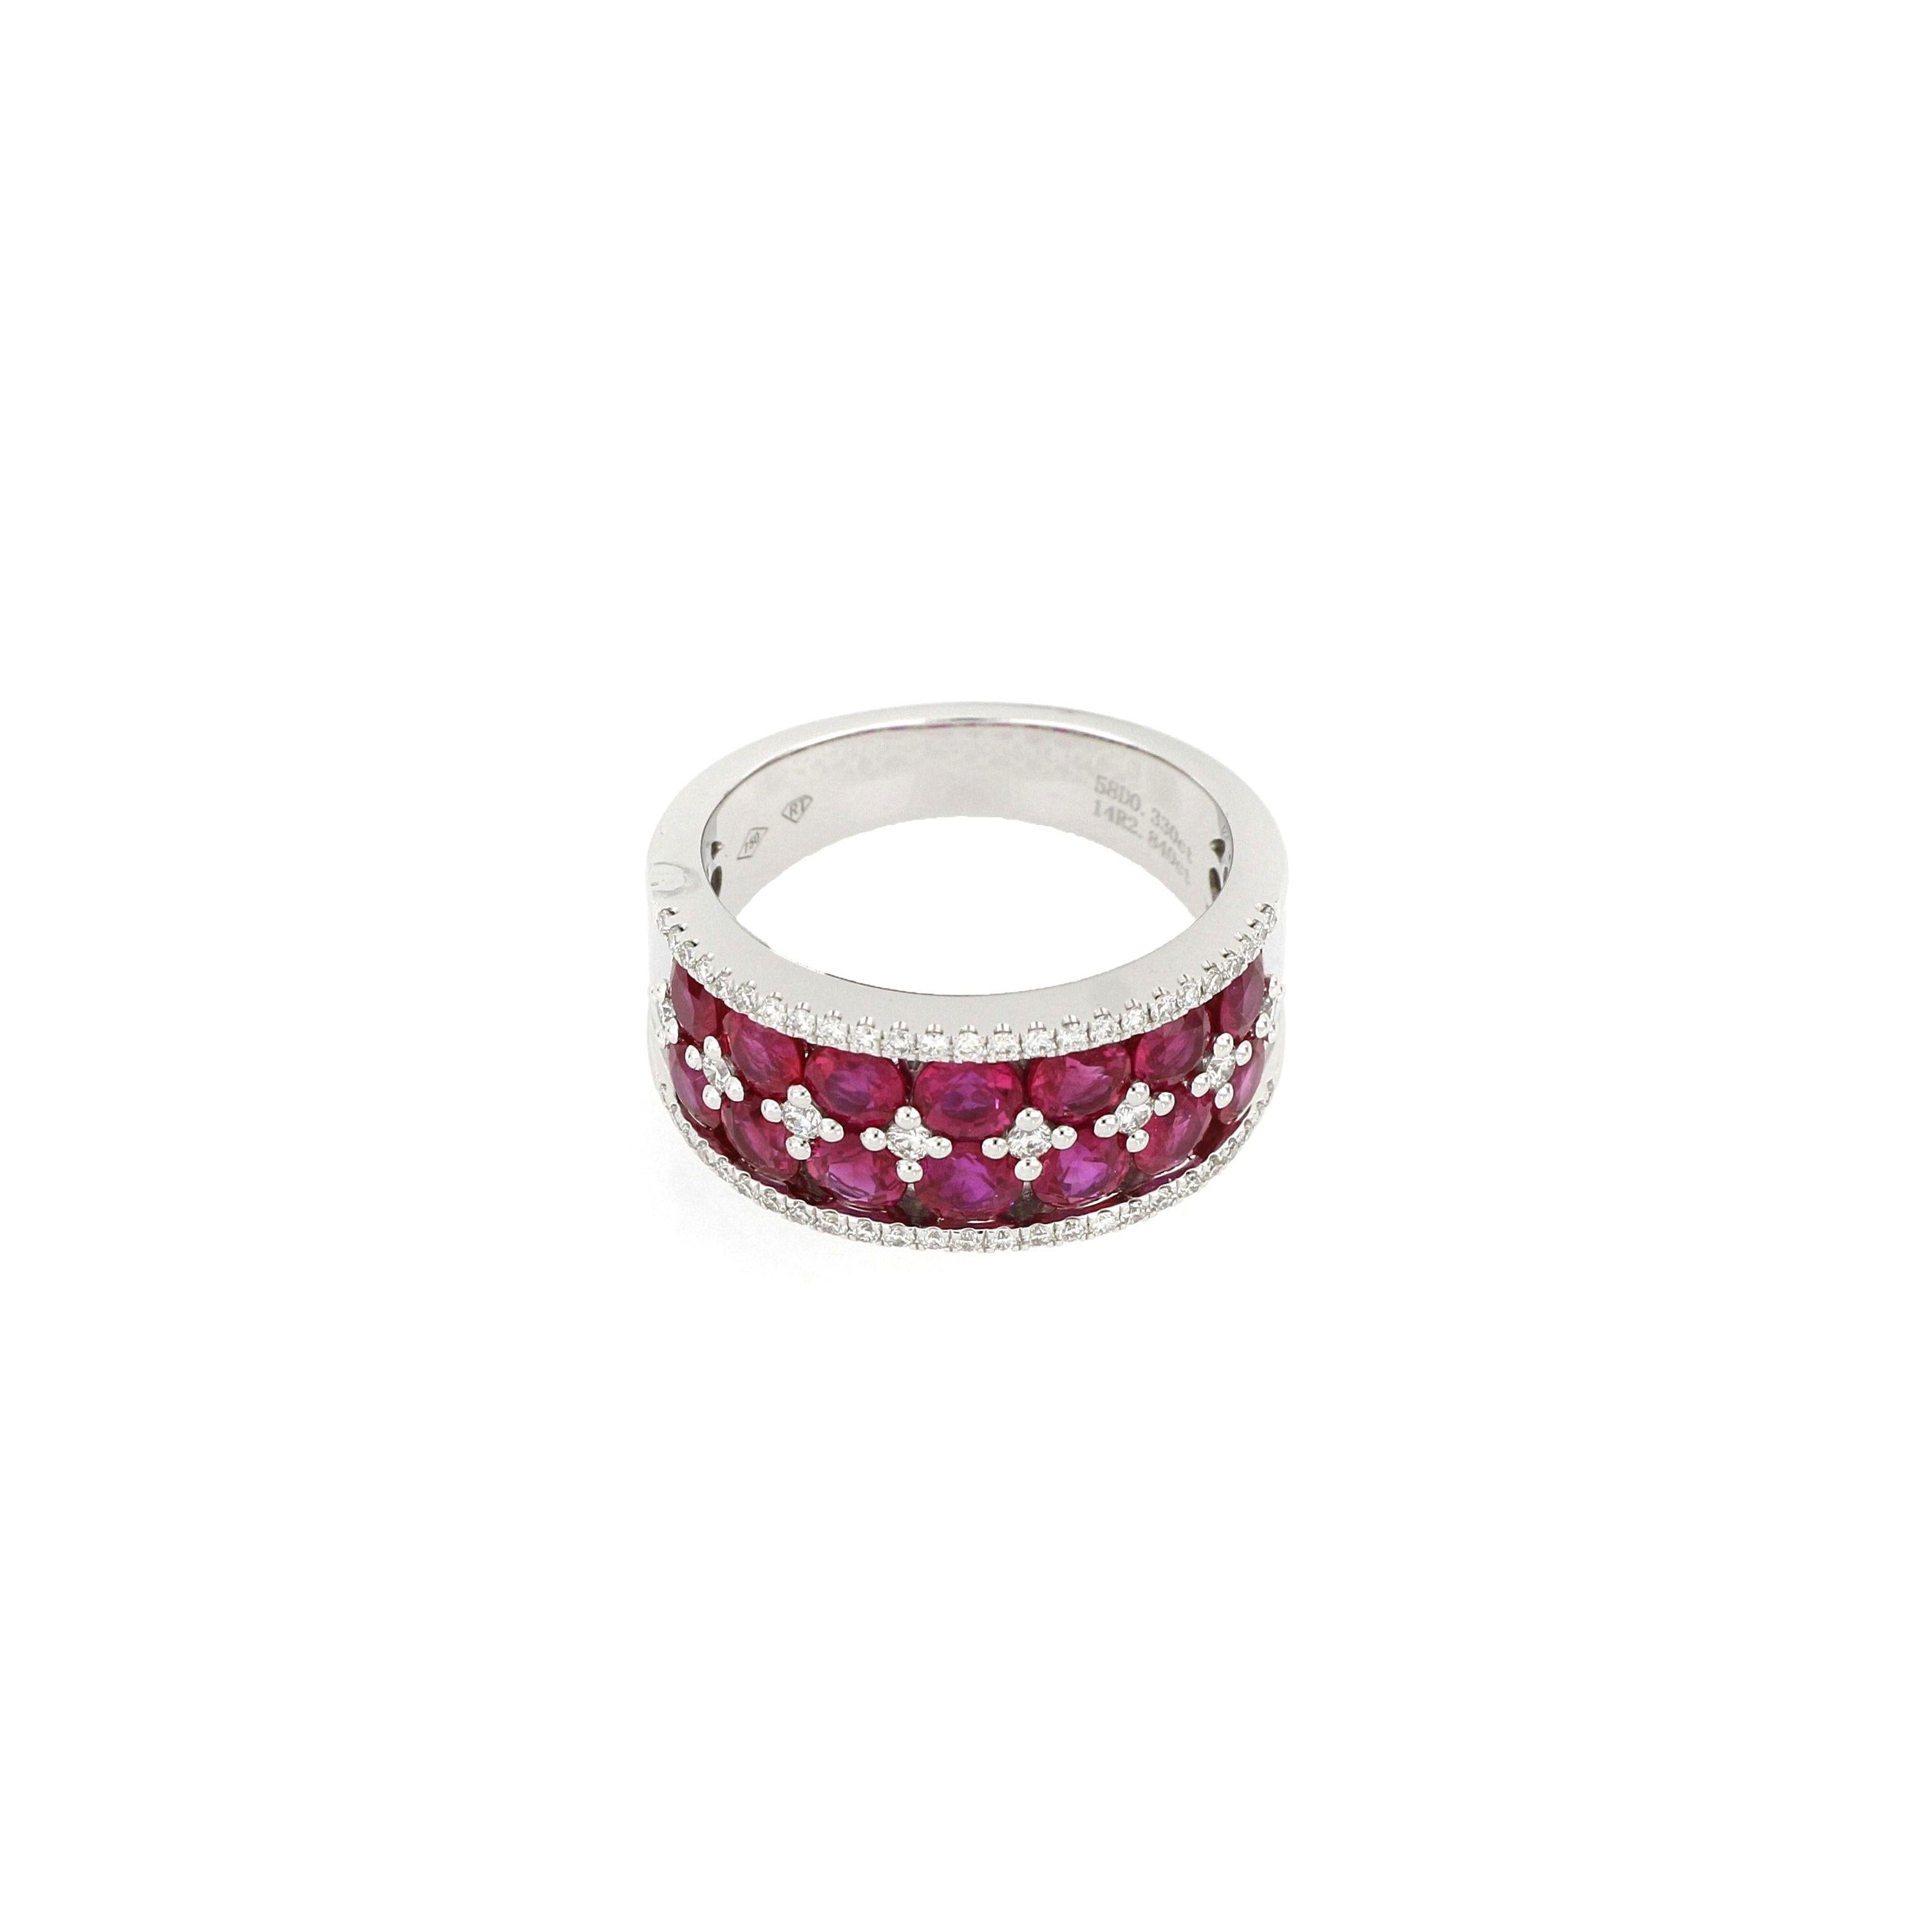 A classy and timeless ruby and diamond band ring, with natural brilliant cut Ruby totalling 2.84cts, sourced in Burma, surrounded by brilliant cut diamonds totalling 0.33cts, mounted in 18 Karat white gold.
O’Che 1867 is renowned for its high